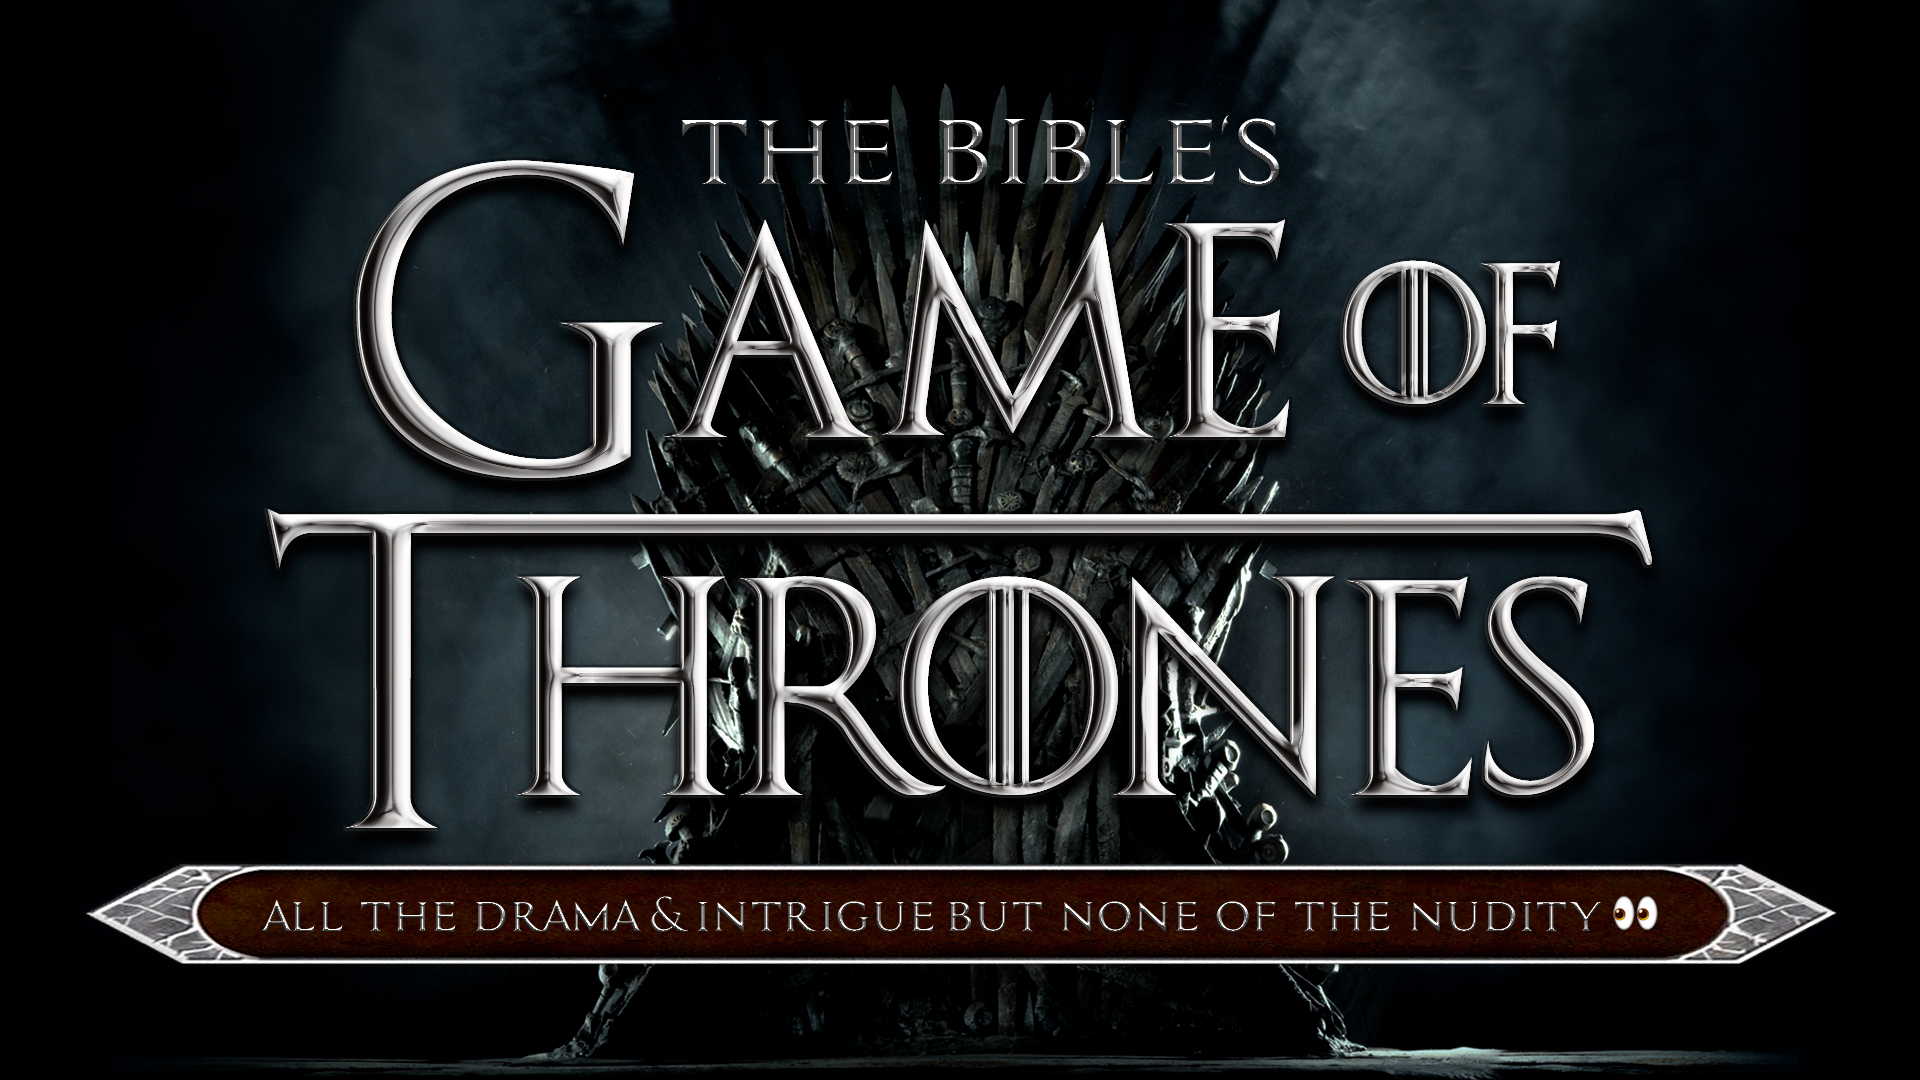   The Bible's Game Of Thrones